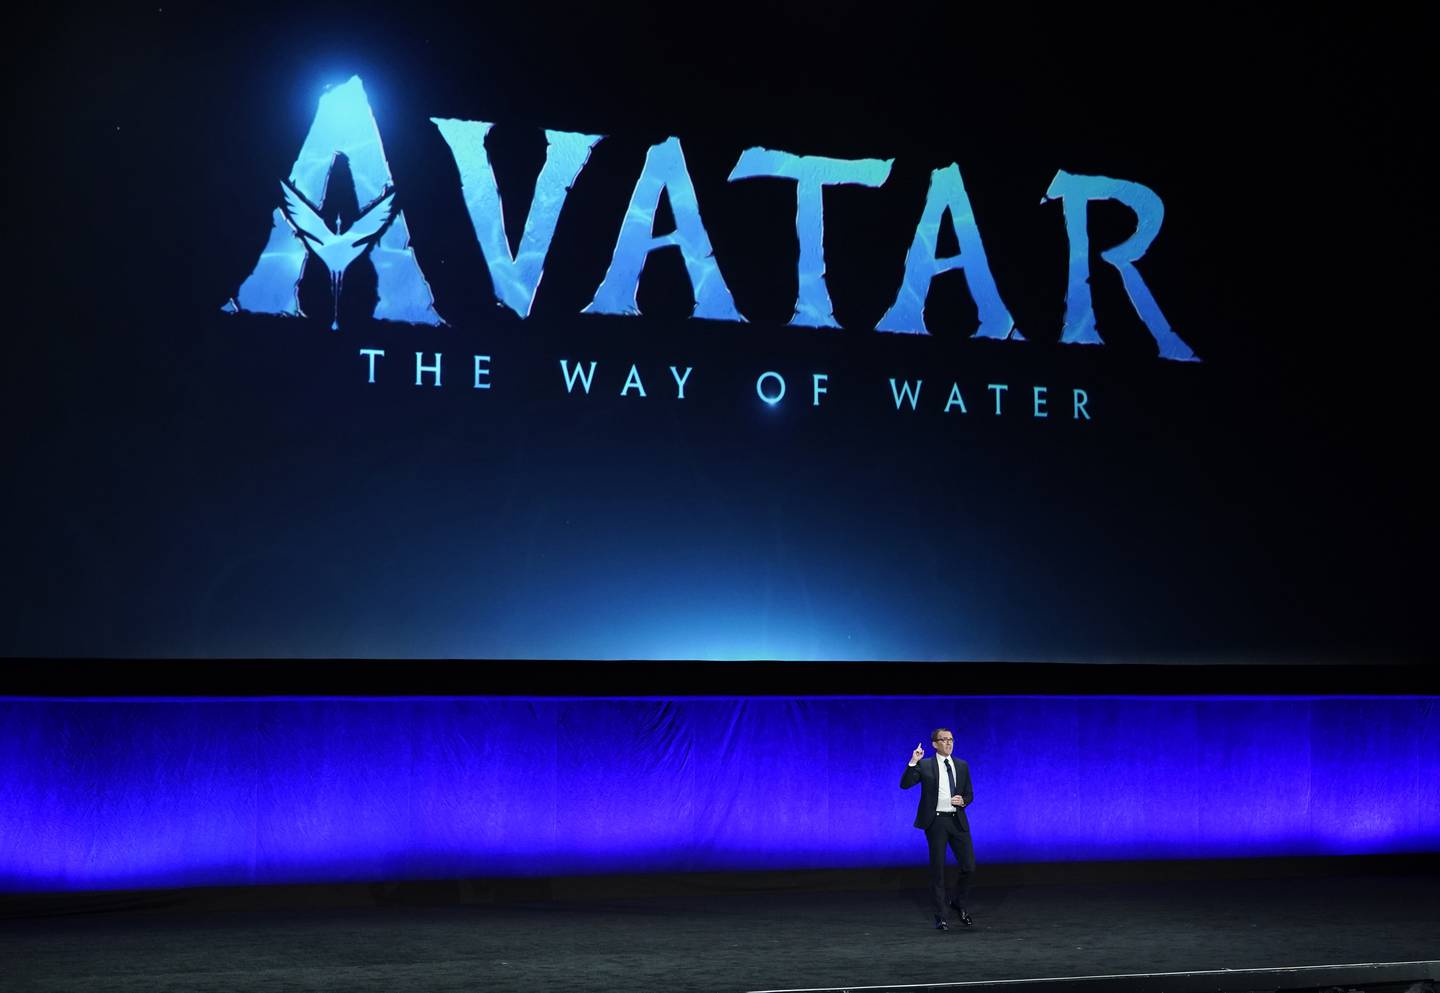 Tony Chambers at Walt Disney Studios presenting the highly anticipated 'Avatar: The Way of Water' at CinemaCon. AP